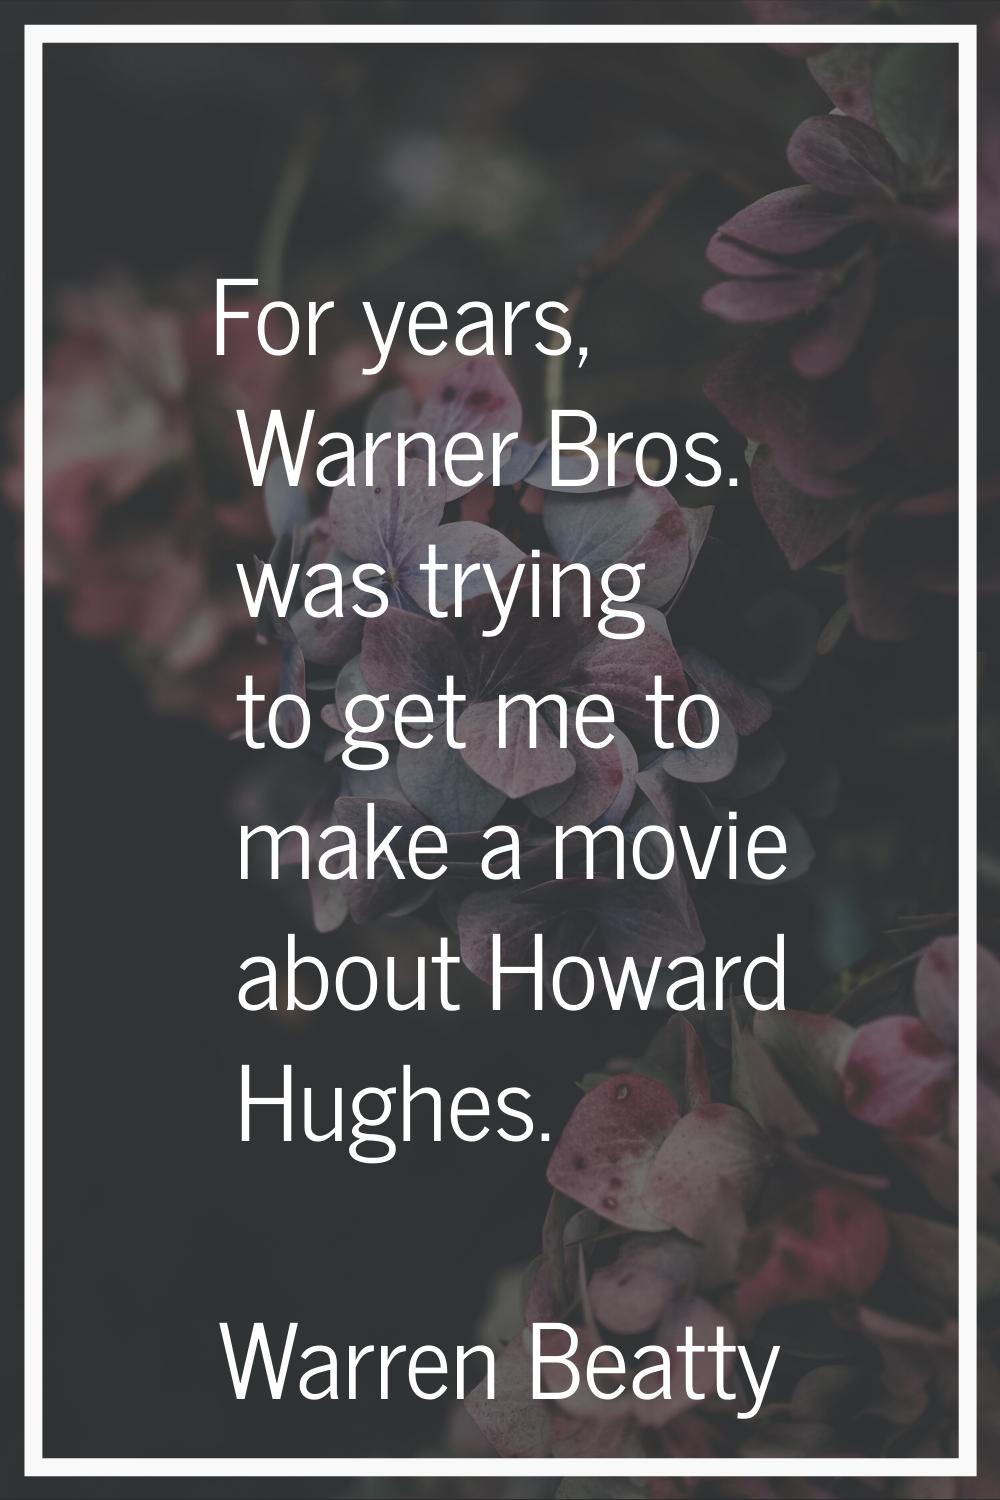 For years, Warner Bros. was trying to get me to make a movie about Howard Hughes.